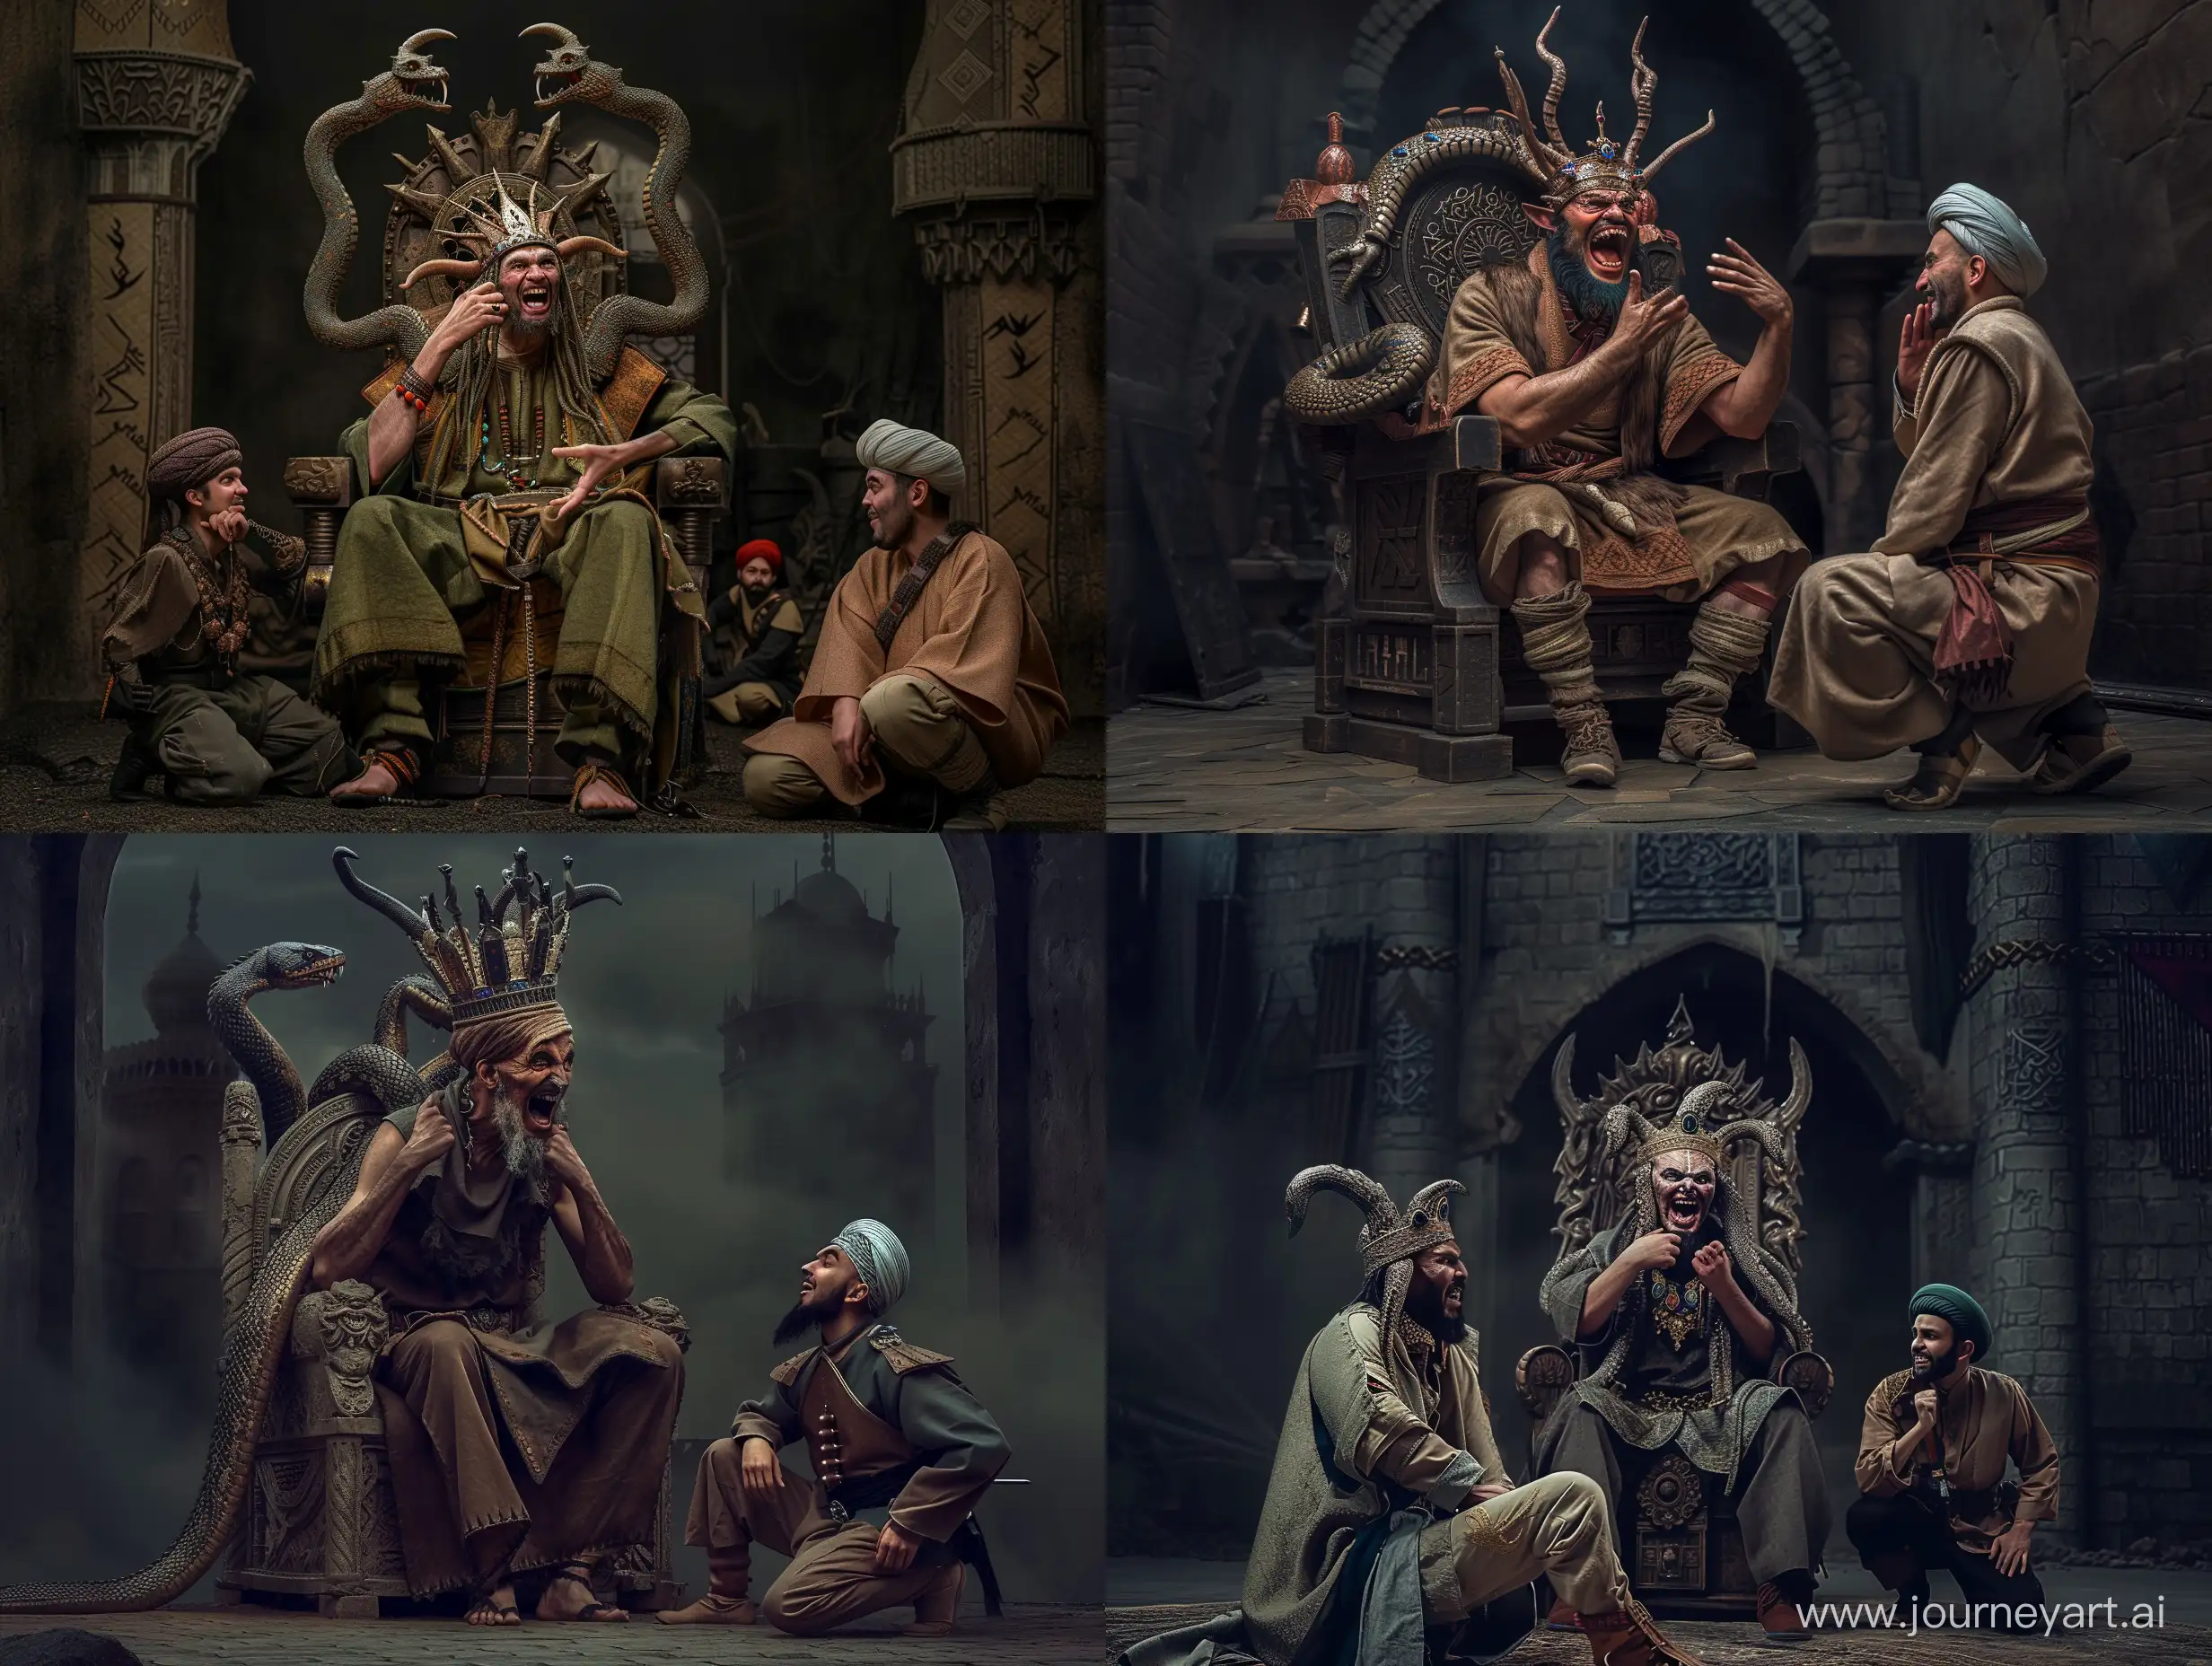 Sinister-Persian-Demonic-King-on-Throne-with-Serpent-Heads-Soldiers-Kneeling